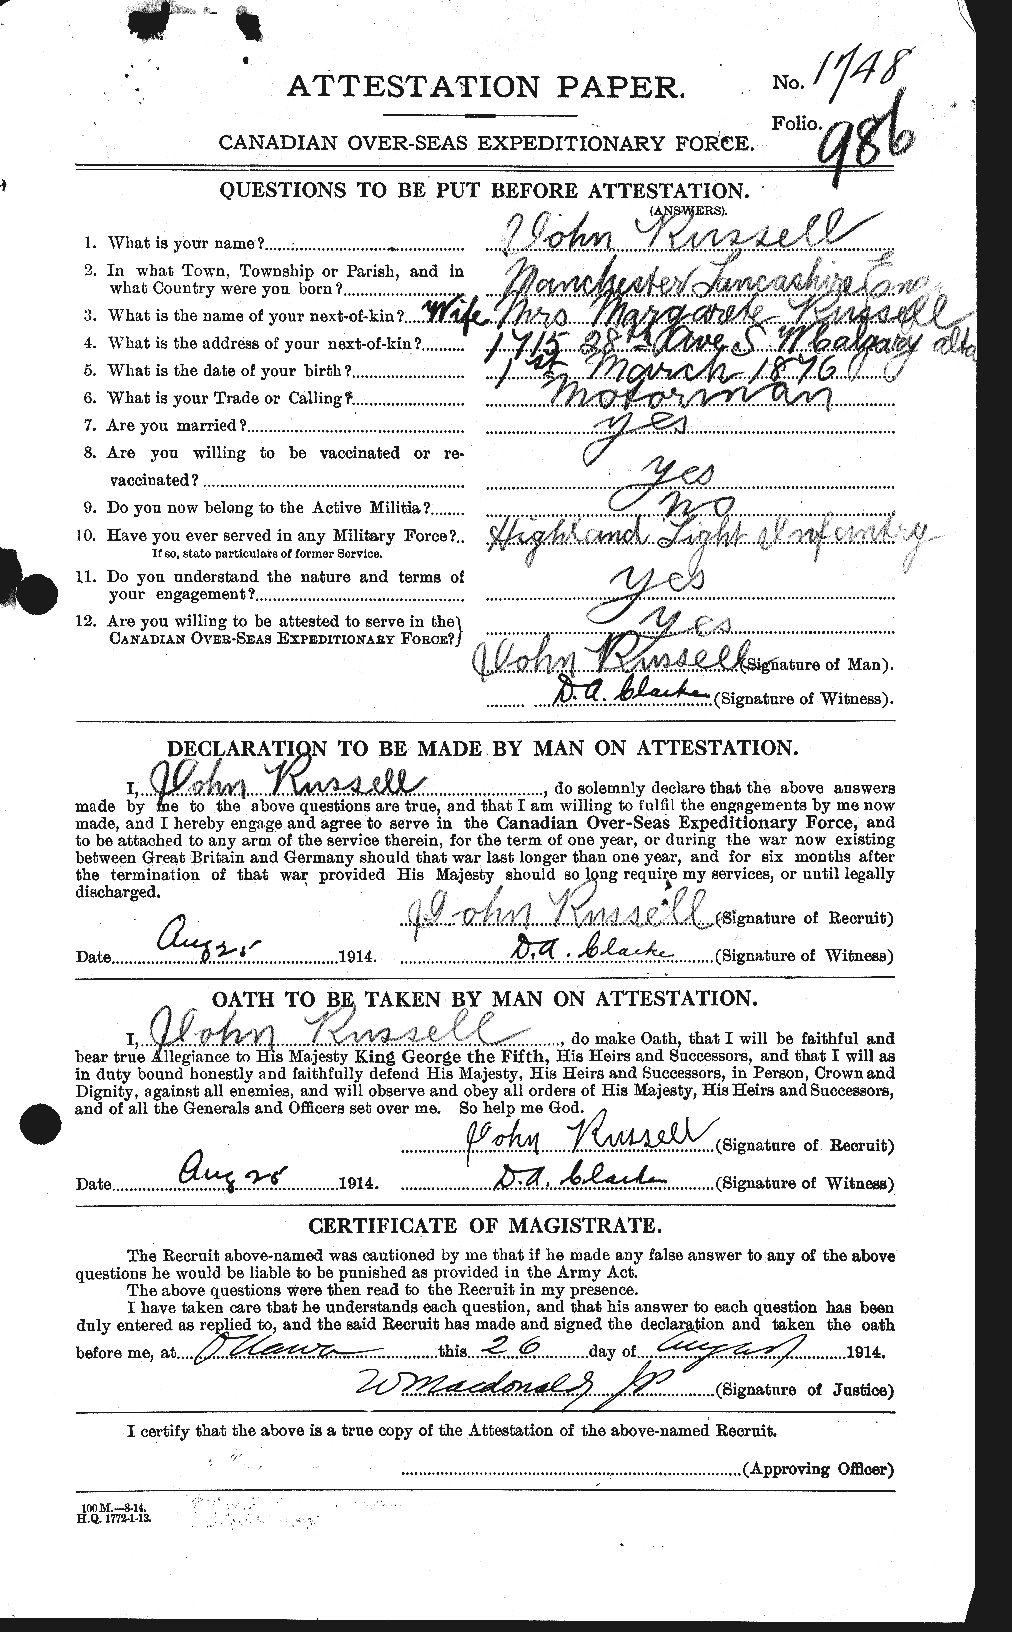 Personnel Records of the First World War - CEF 619091a